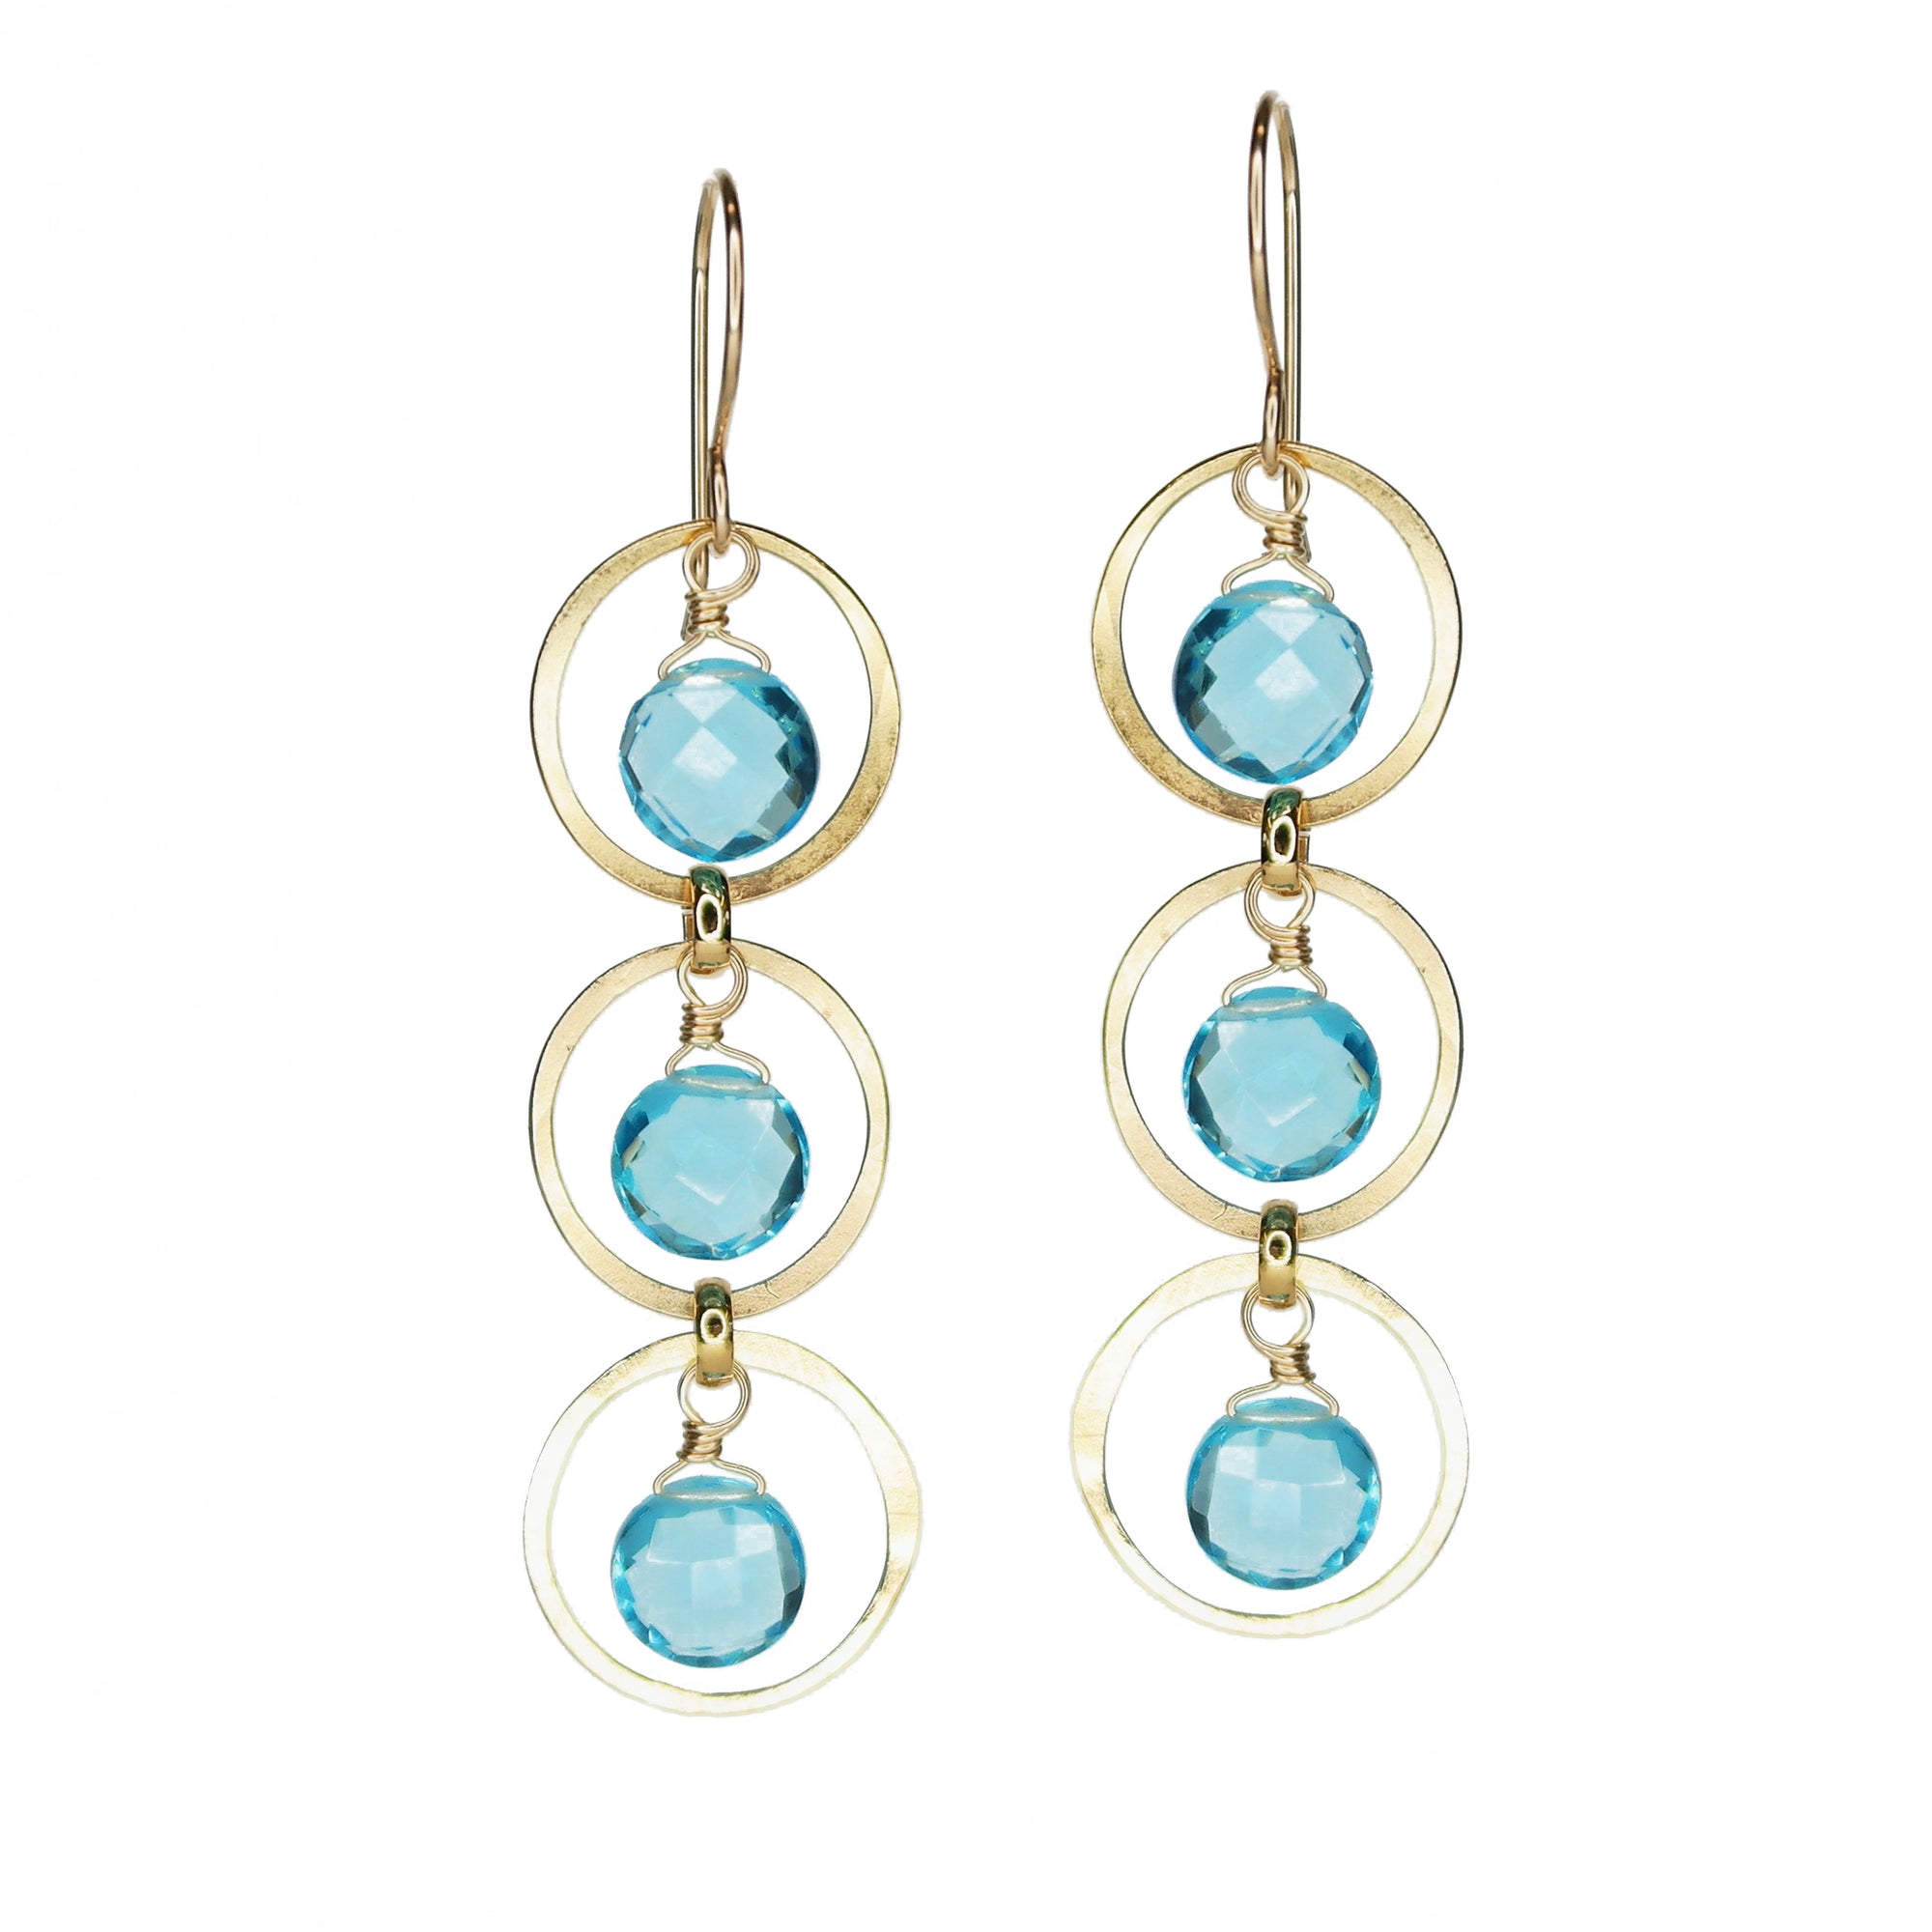 Triple Gems in Forged Circles - Blue Topaz